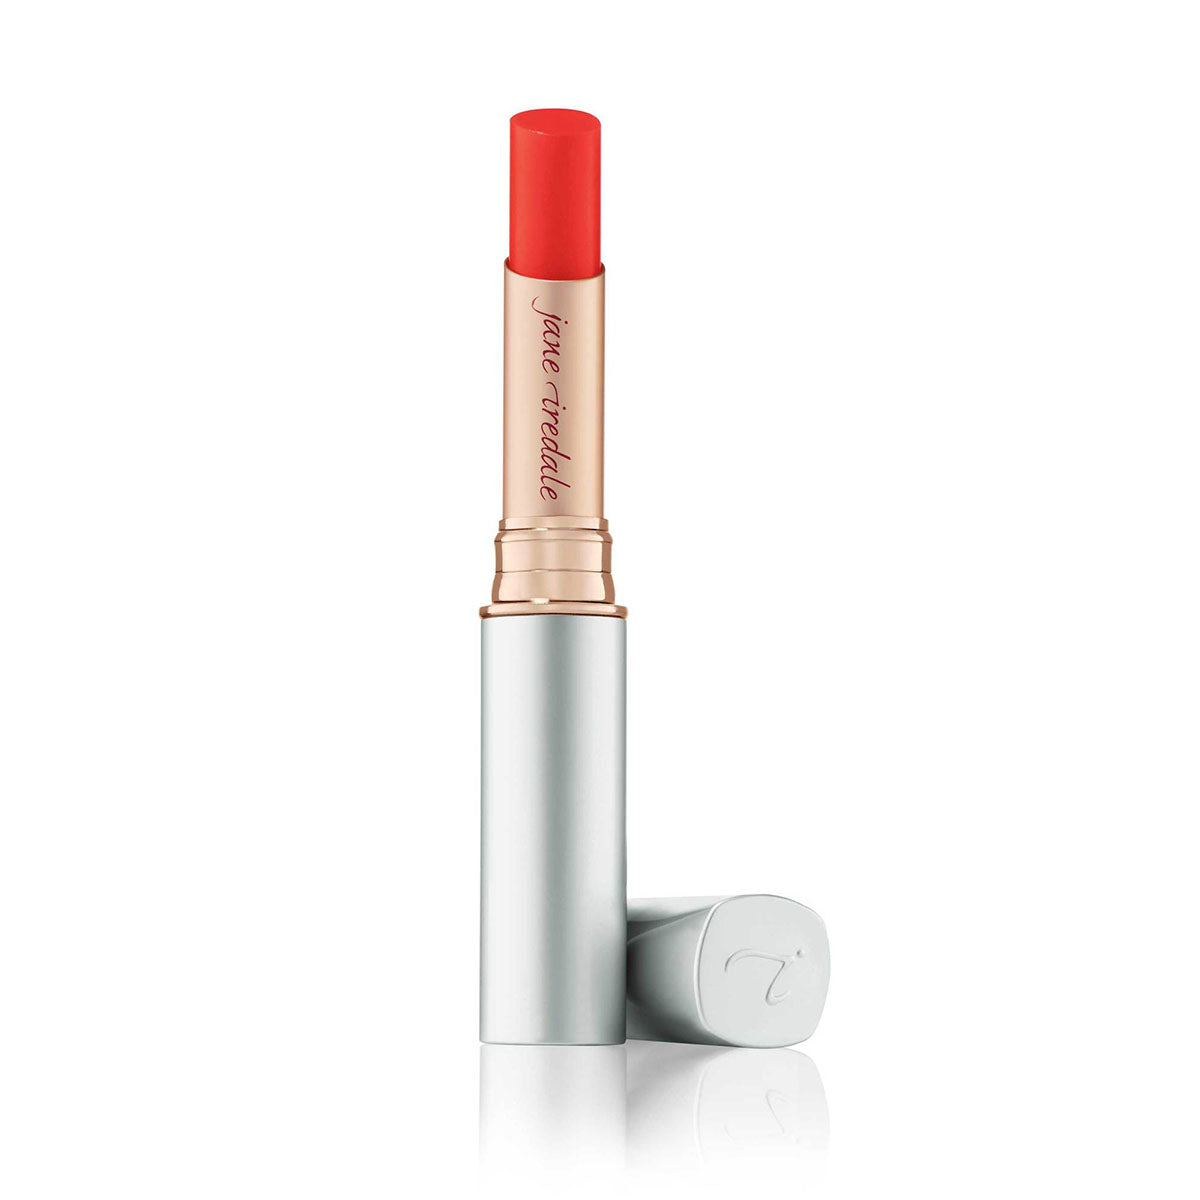 Jane Iredale 變幻豐唇蜜(玫瑰色) Forever Red Just Kissed Lip and Cheek Stain 3g